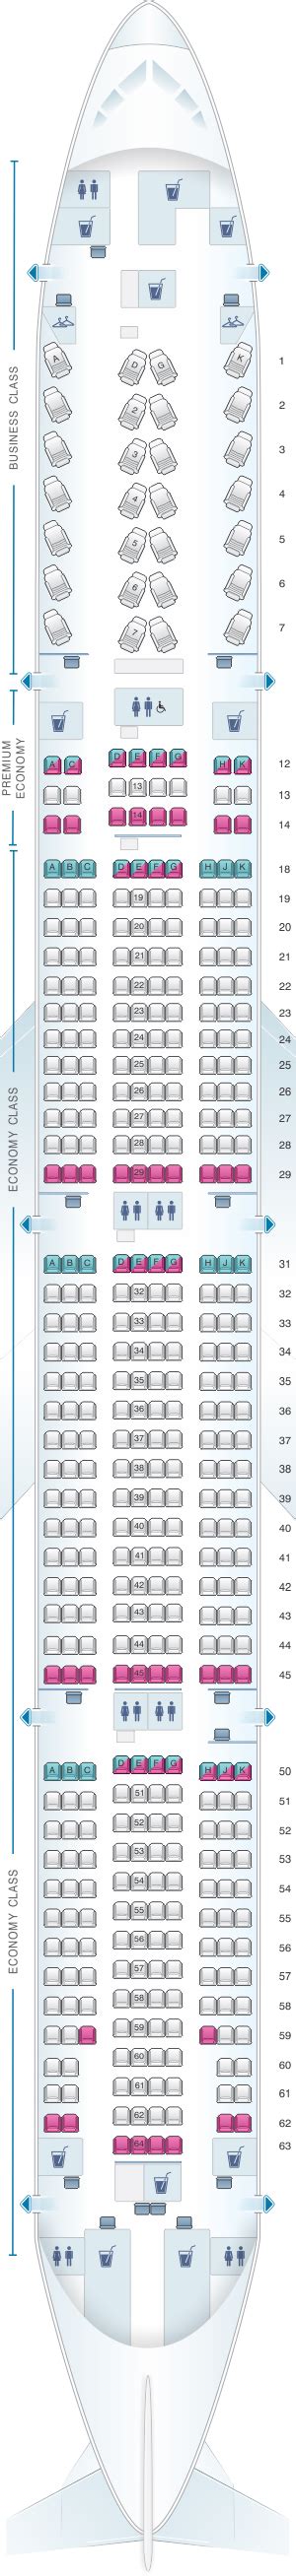 Seating Chart Boeing Er Air Canada Elcho Table